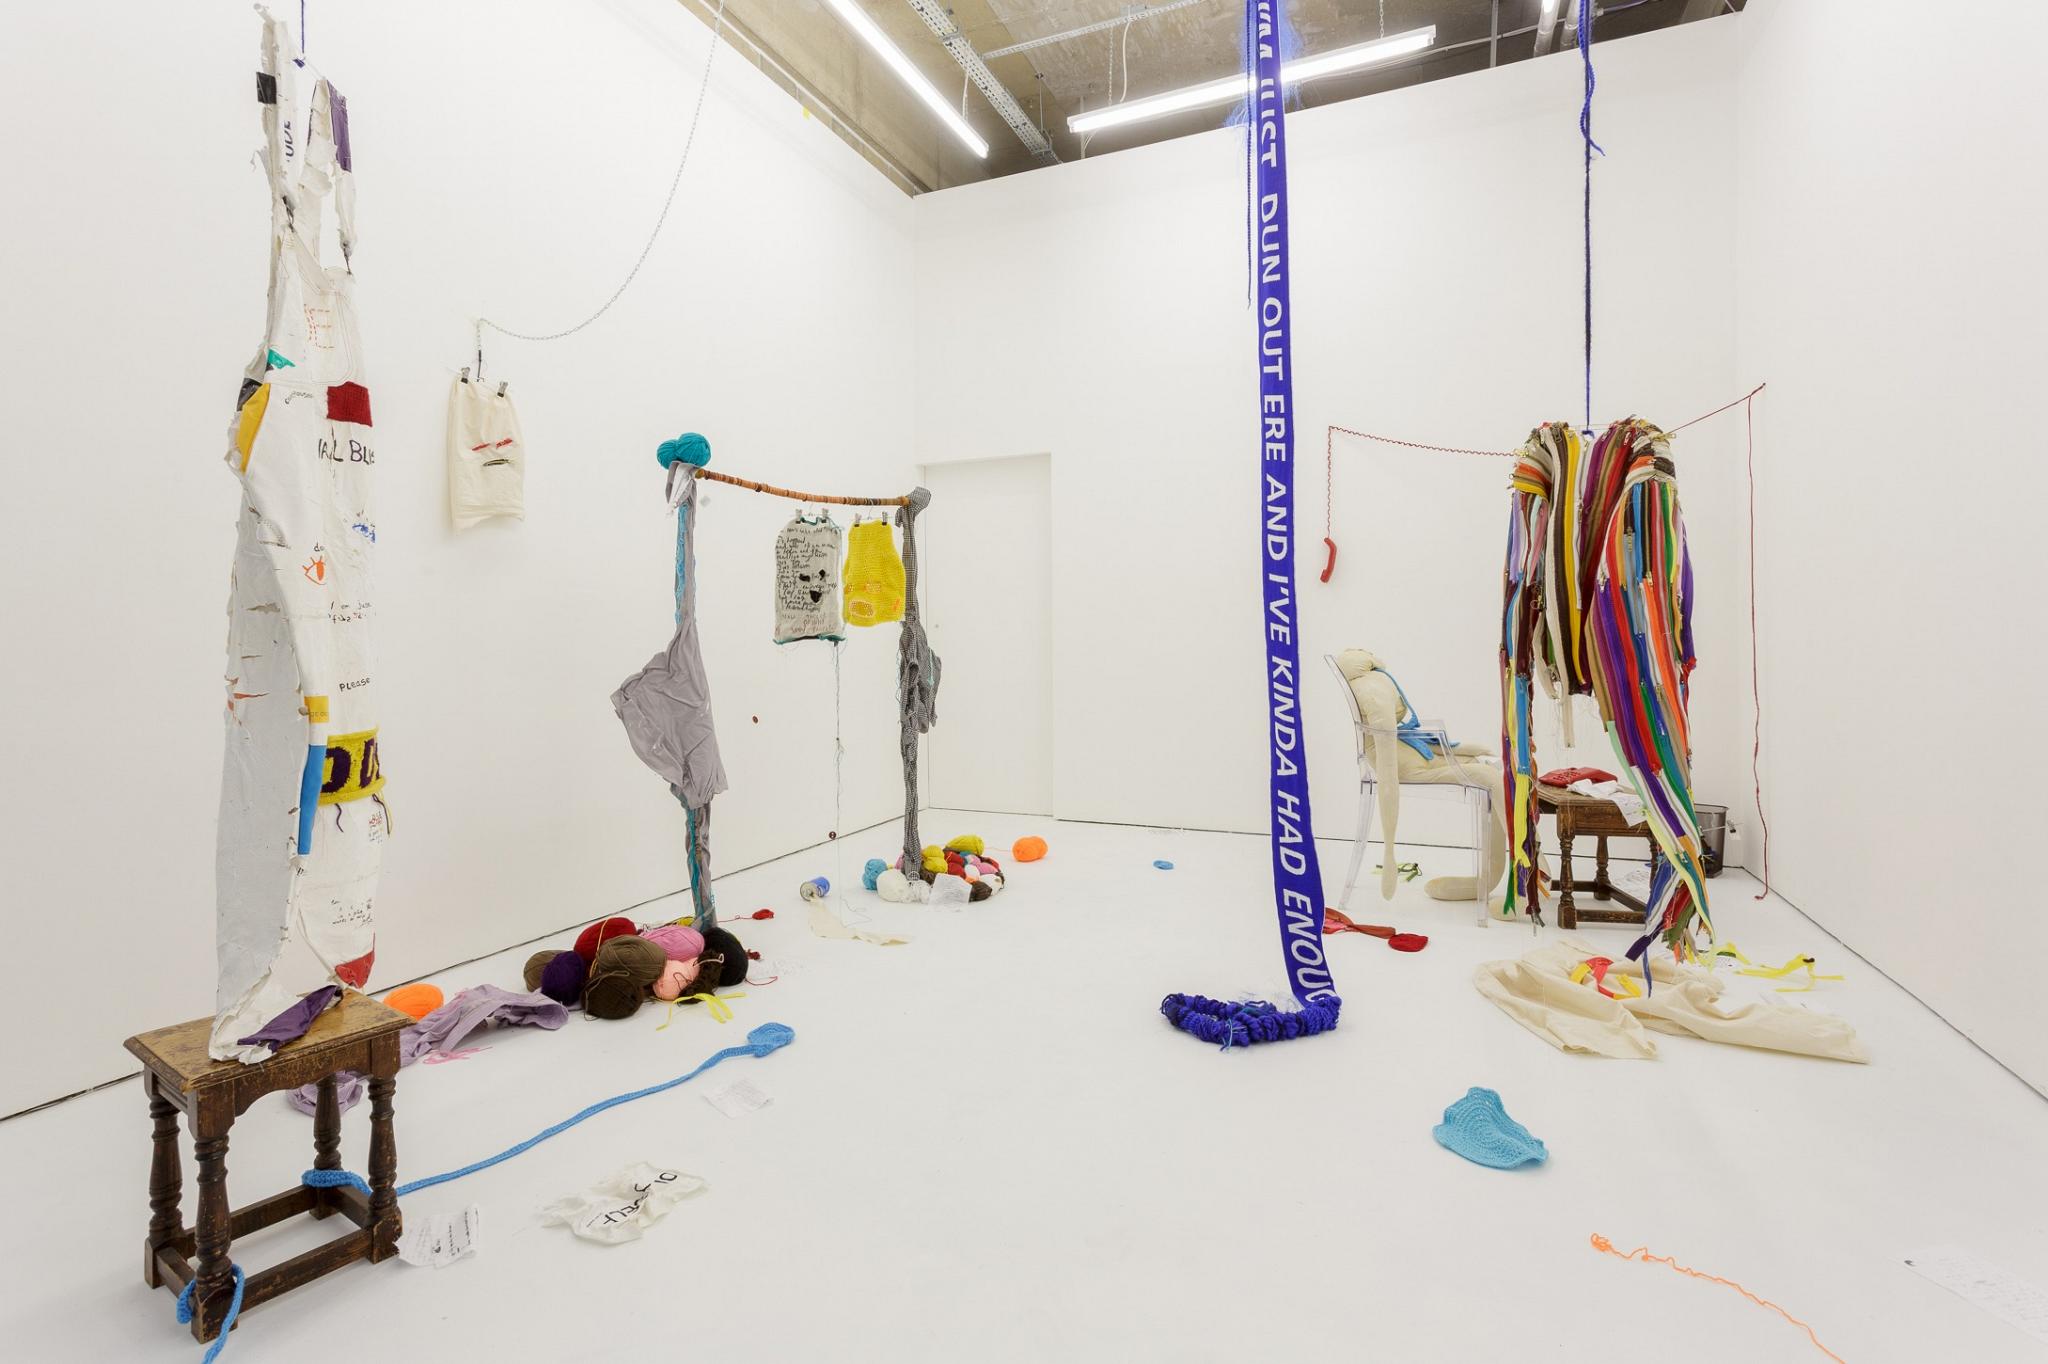 Tyreis Holder artwork, a large white room with a cotton apron in the foreground with piles of knitting balls on the floor